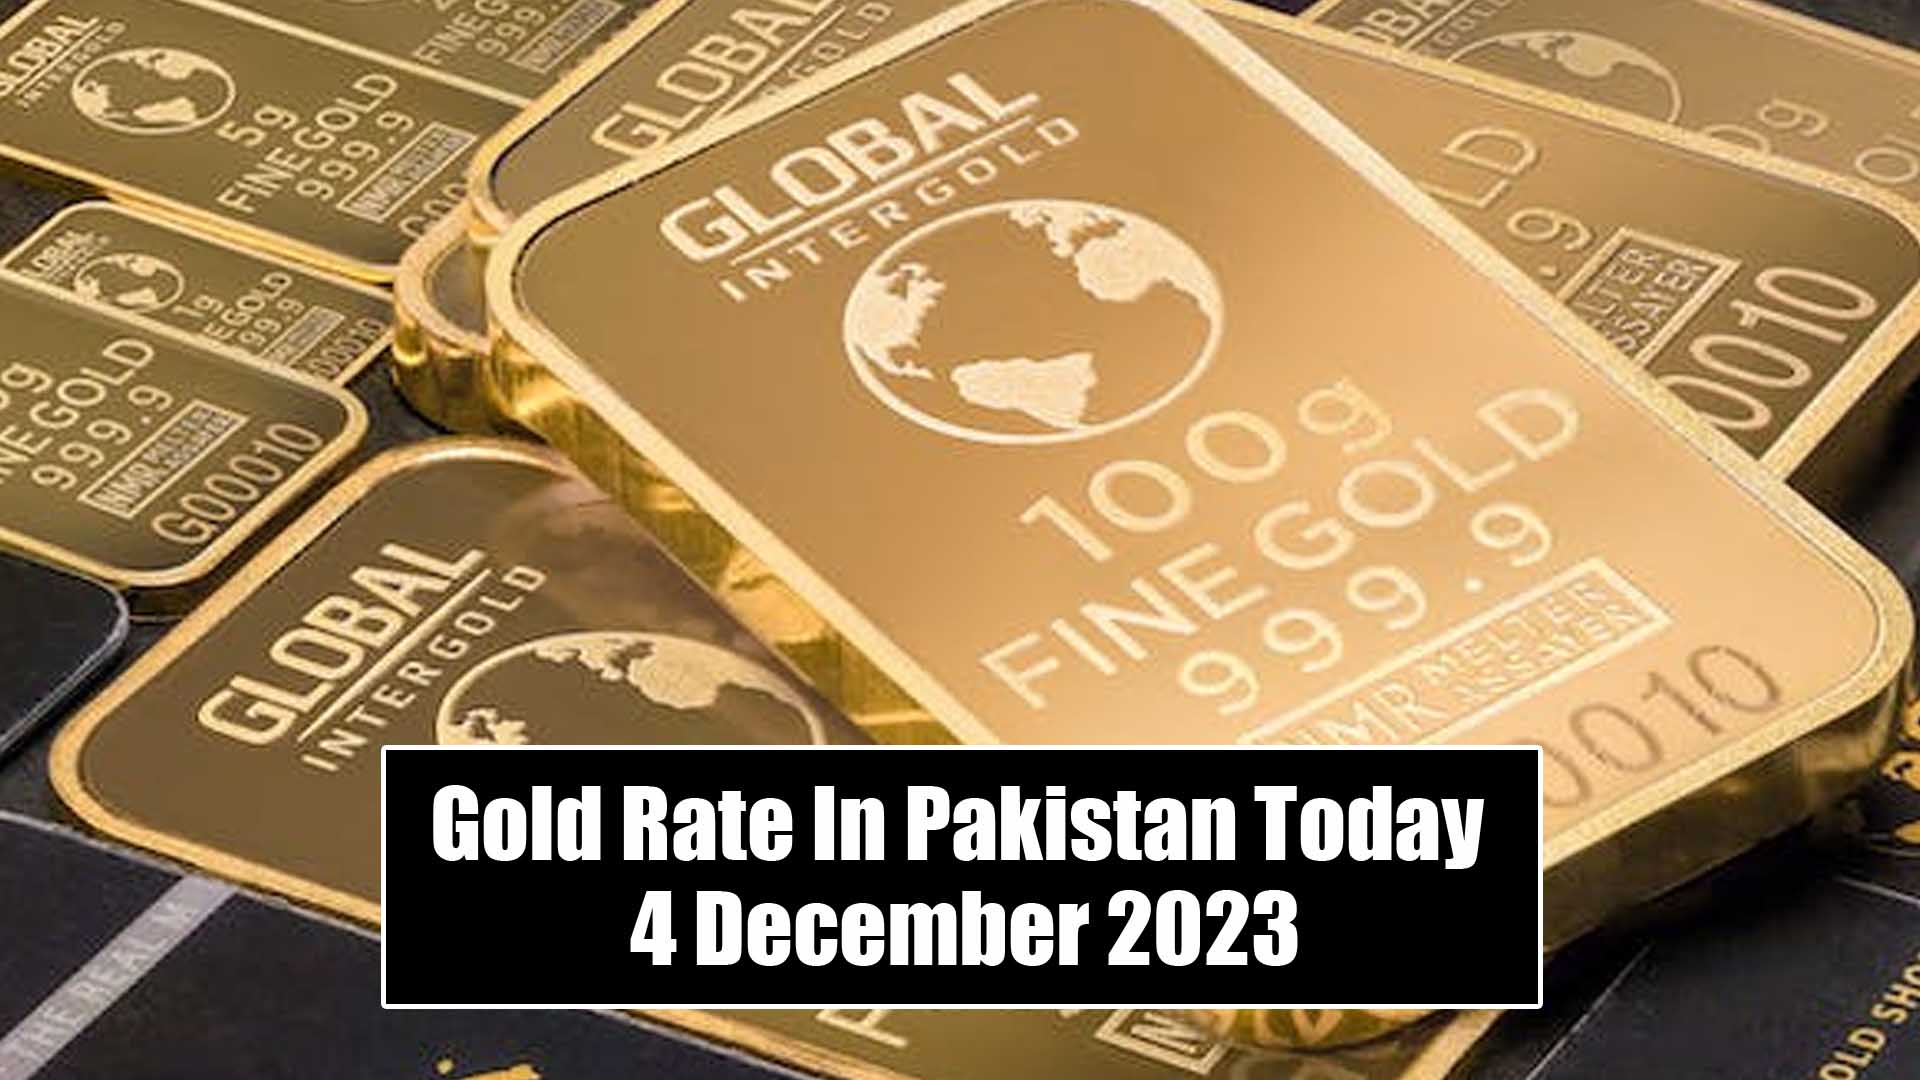 Gold Rate In Pakistan Today 4 December 2023